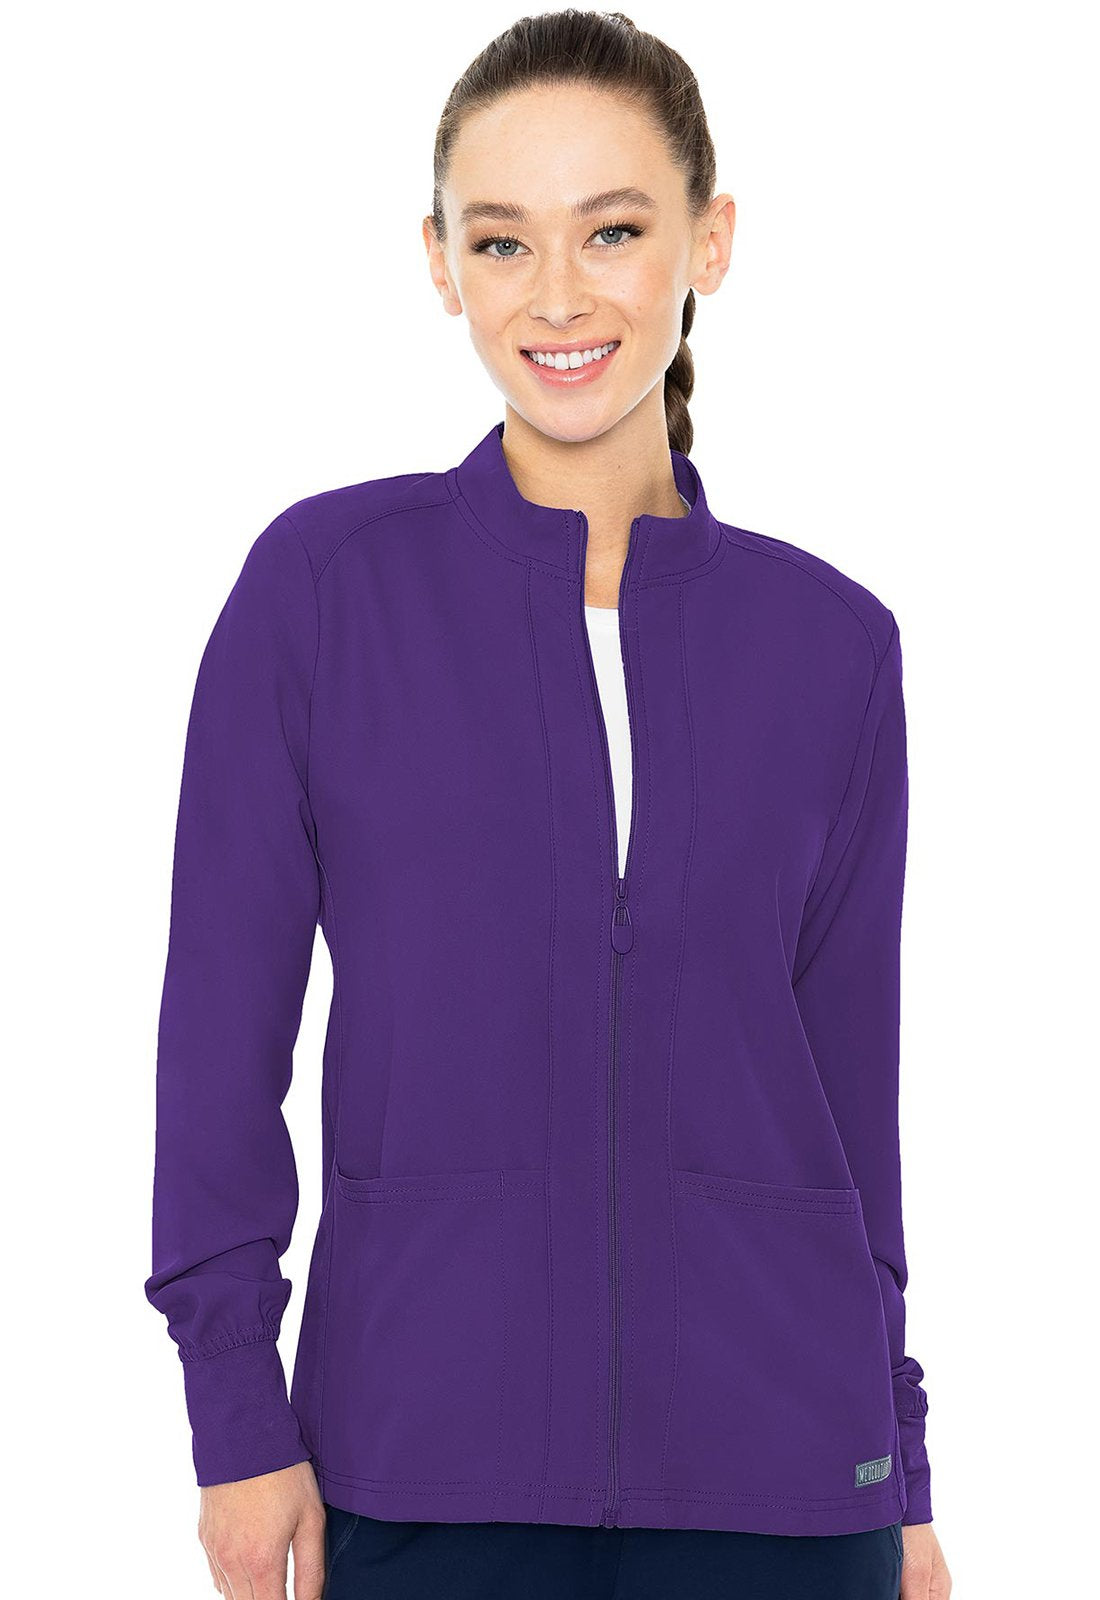 Med Couture MC Insight Grape / 2XL MC Insight  Zip Front Warm-Up With Shoulder Yokes MC2660